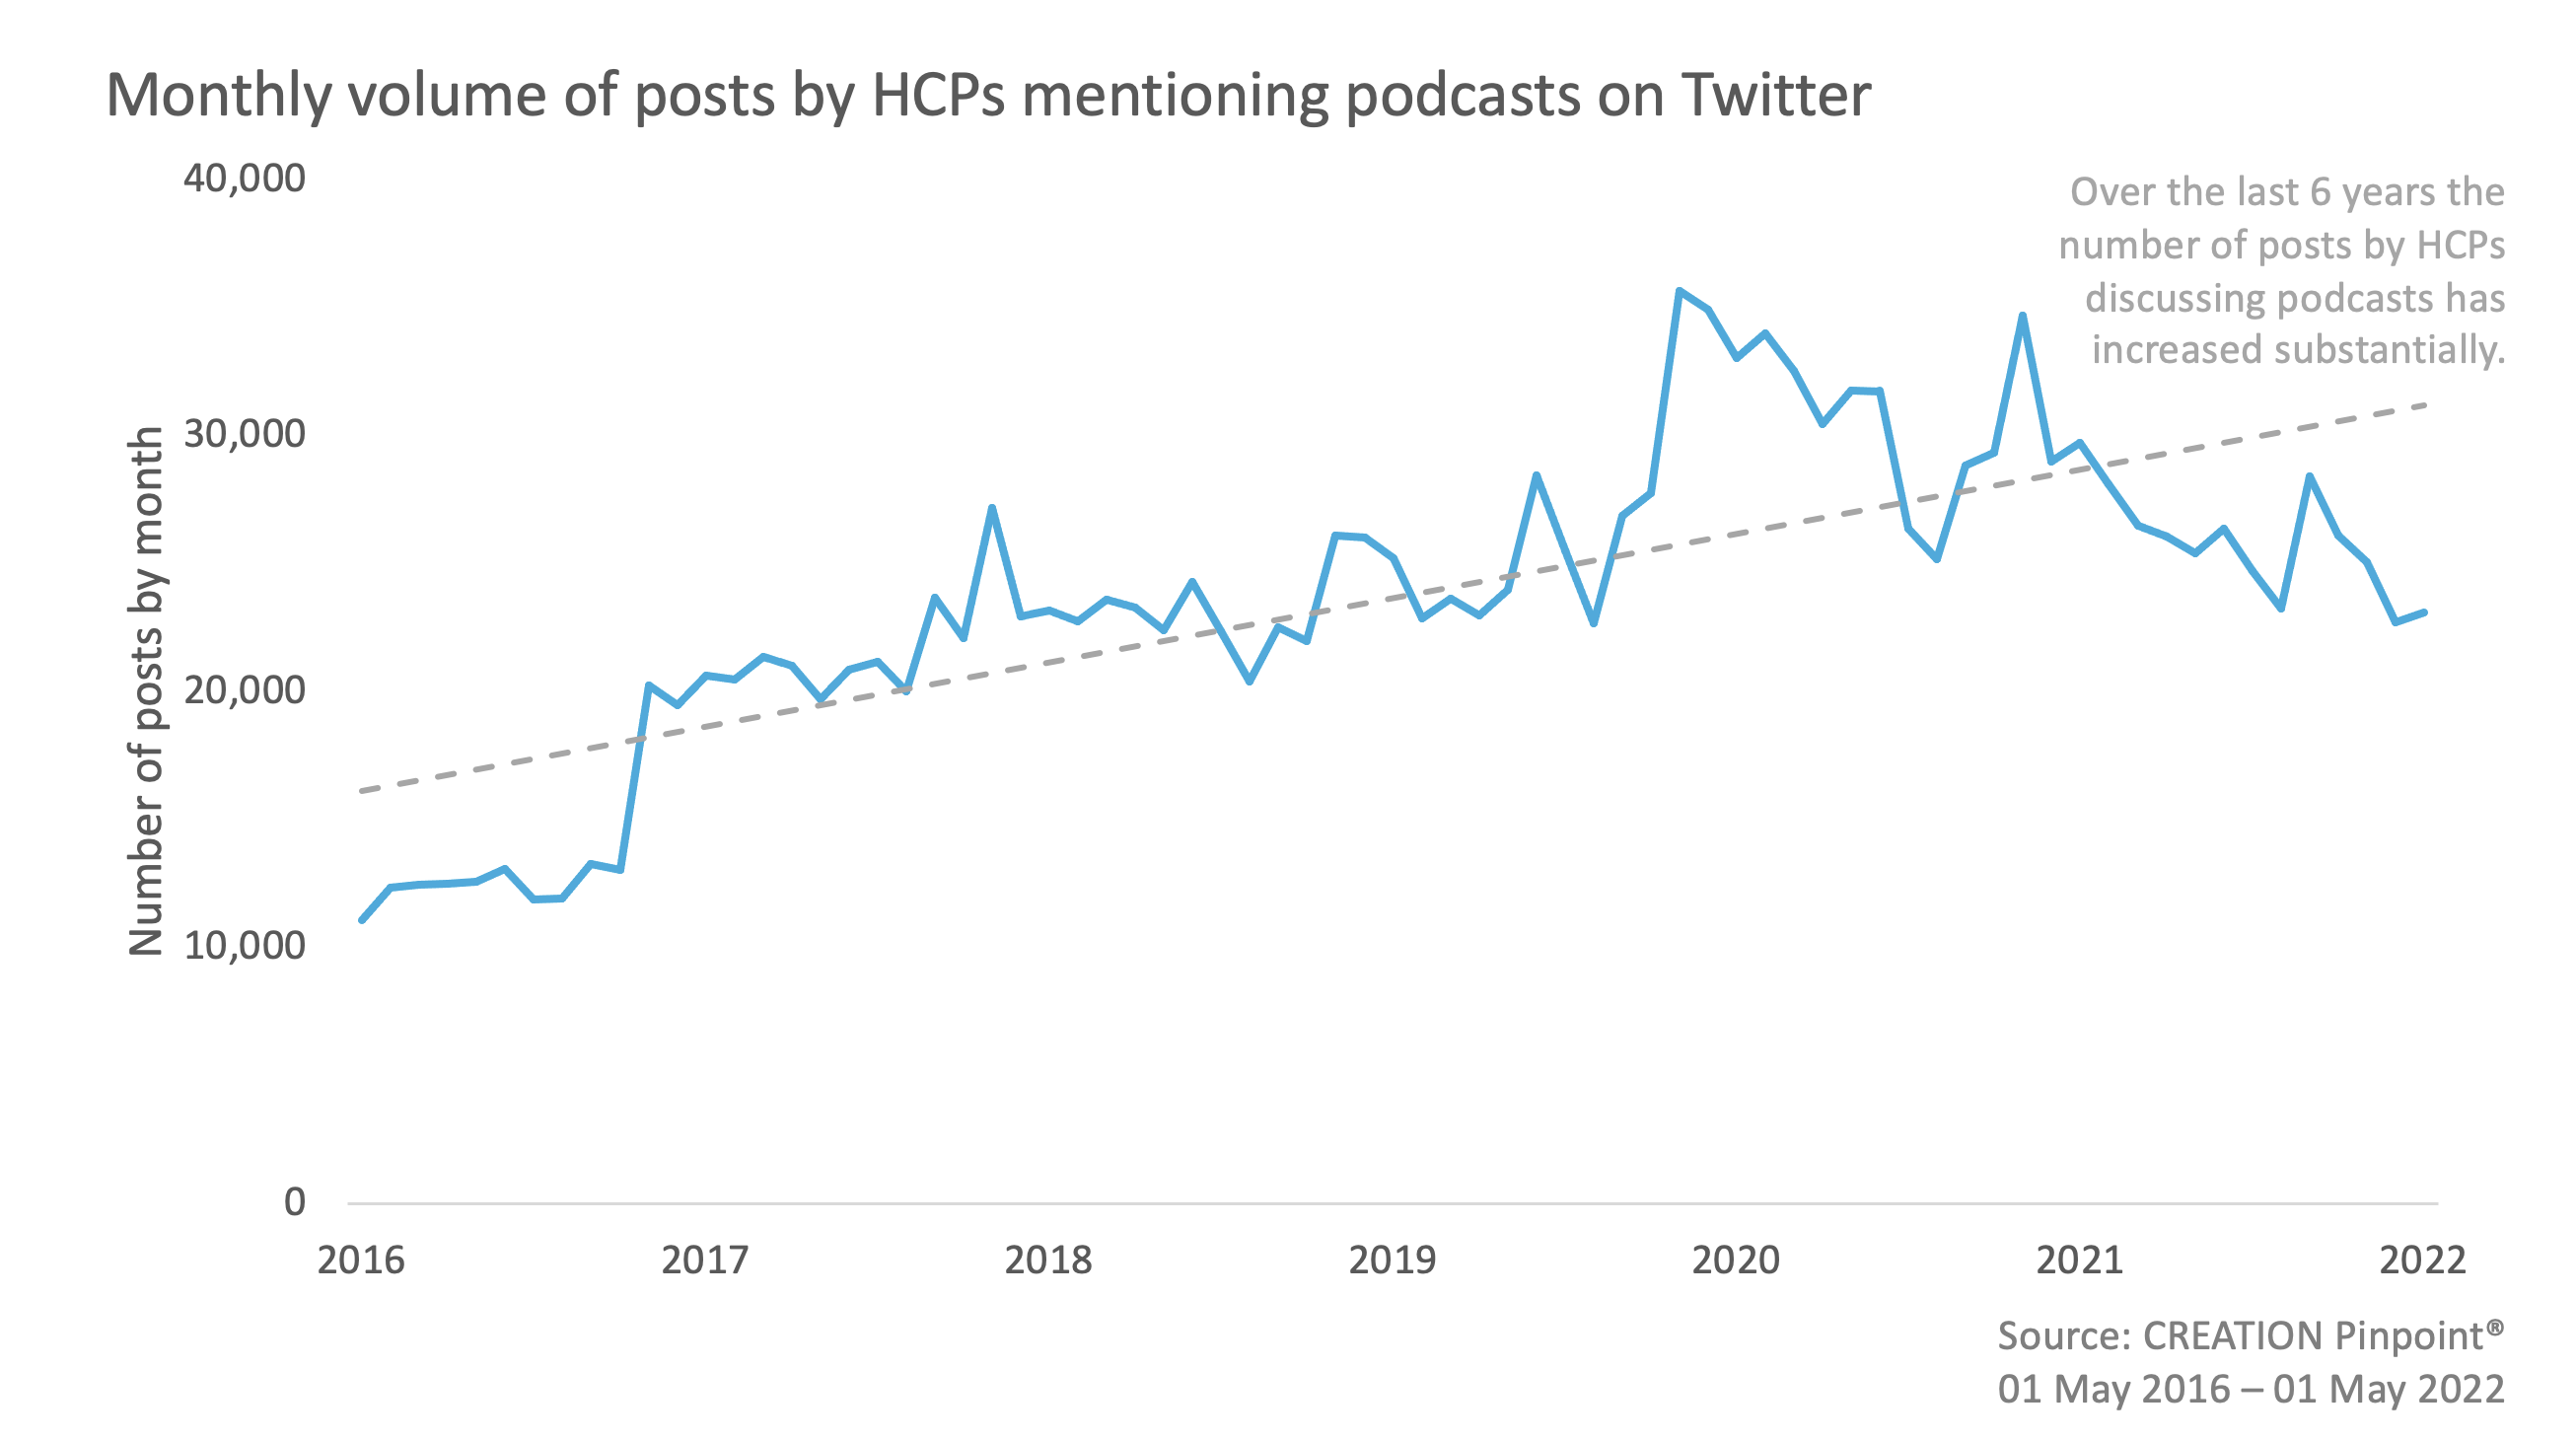 Graph showing monthly colume of posts by HCPs mentioning podcasts on twitter